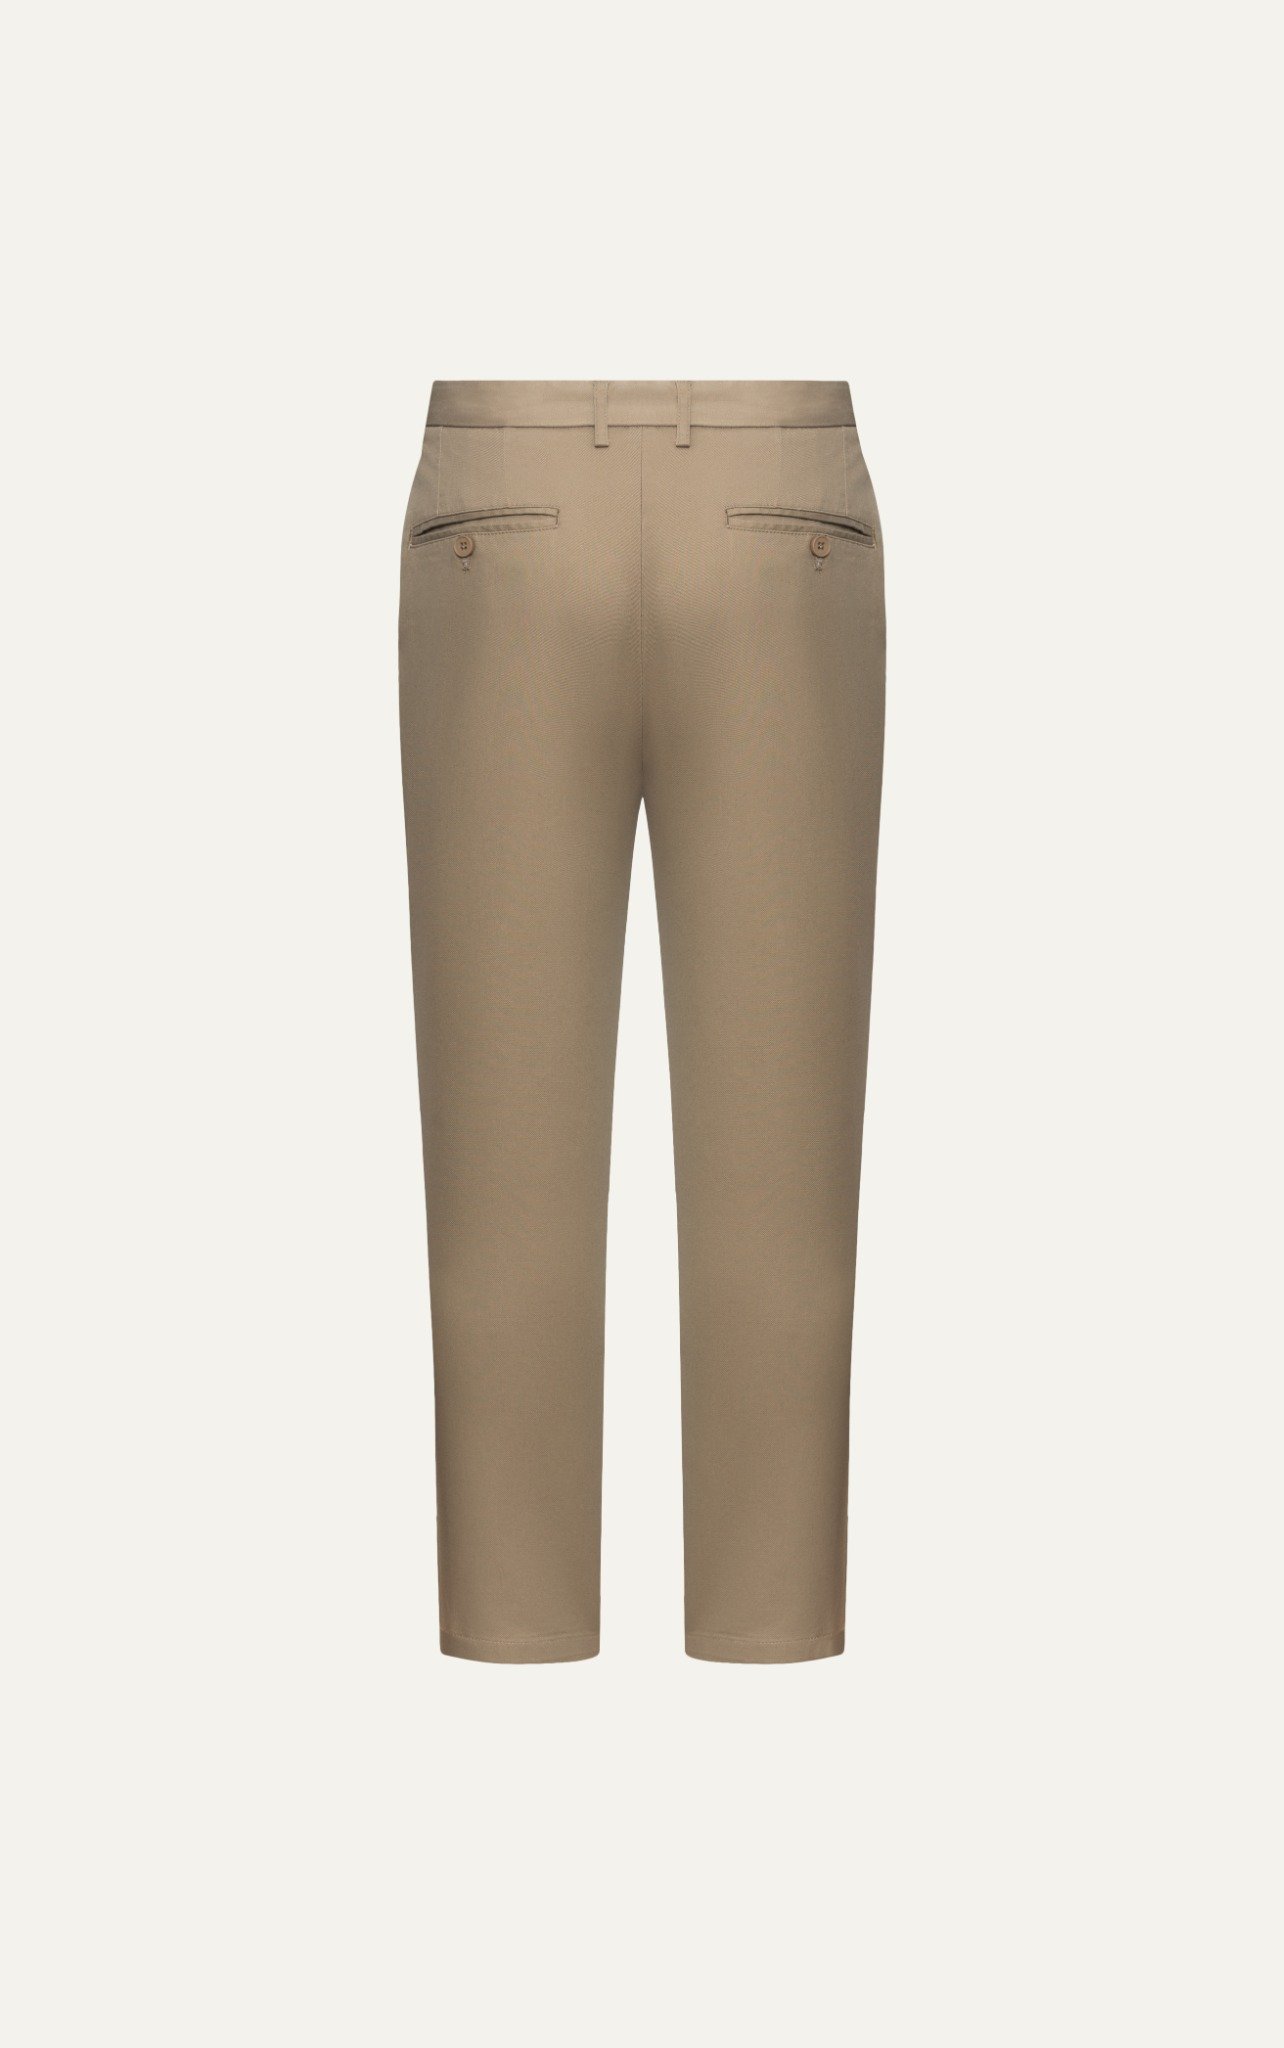 AGF1 FACTORY SLIMFIT NEW KHAKI TROUSERS - BROWN